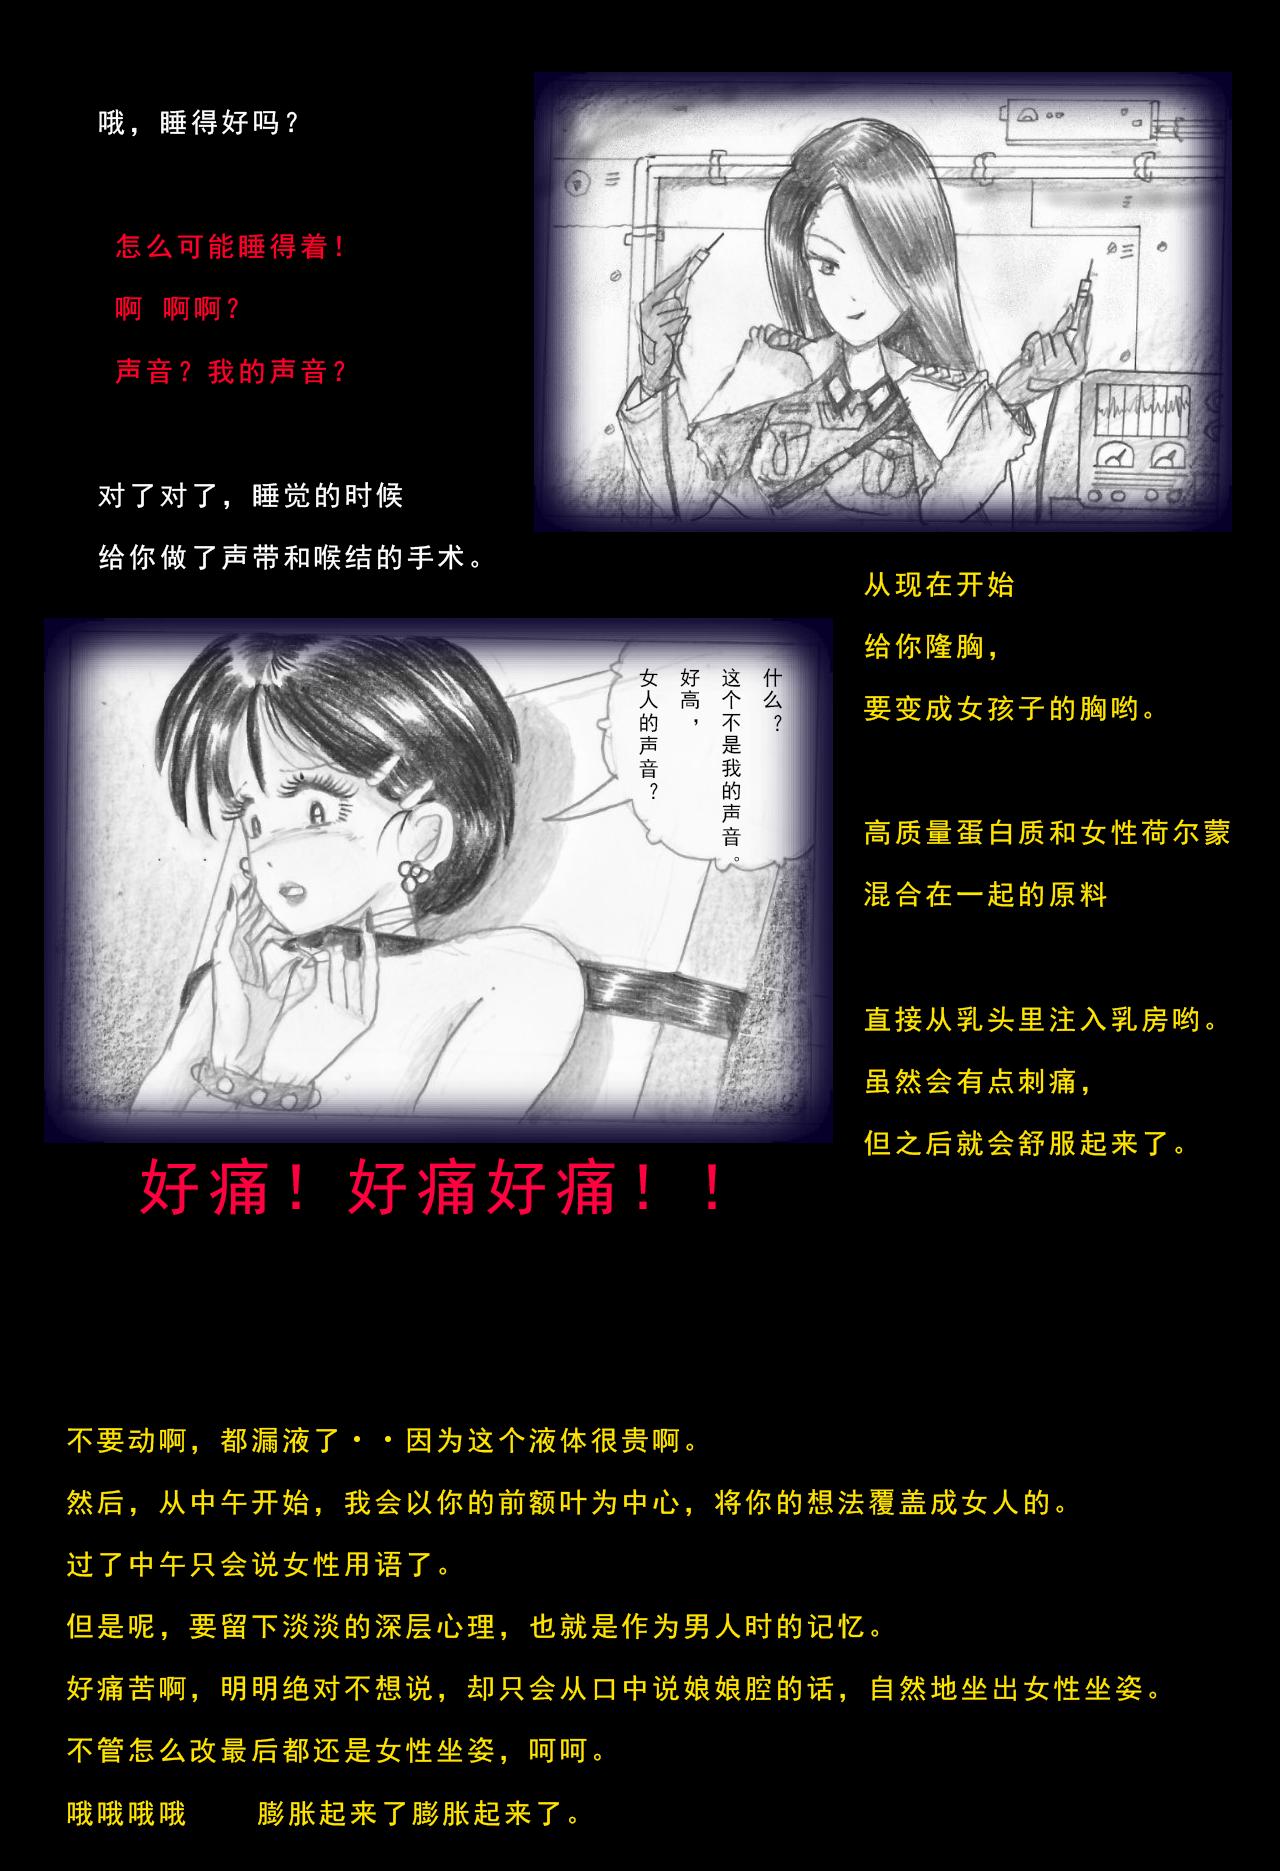 Special Police Third Platoon Captain Abduction Restraint Edition【chinese】 8